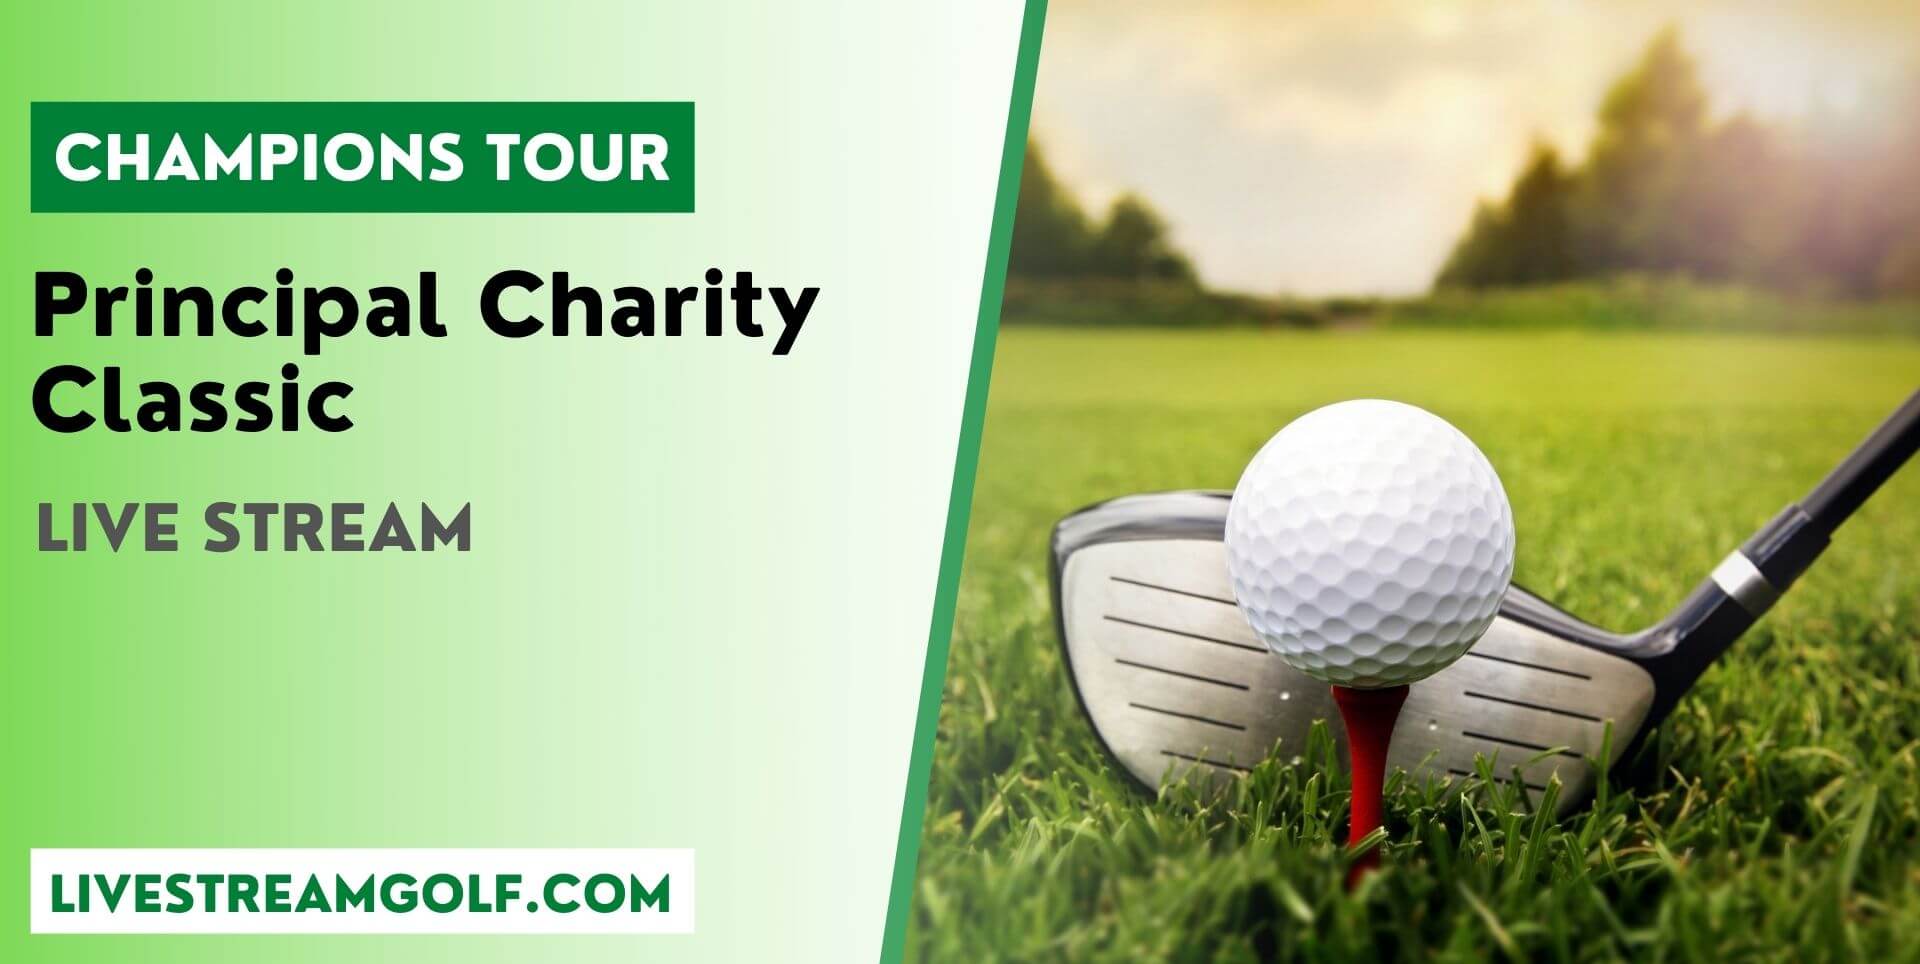 Principal Charity Classic Live Streaming Champions Tour